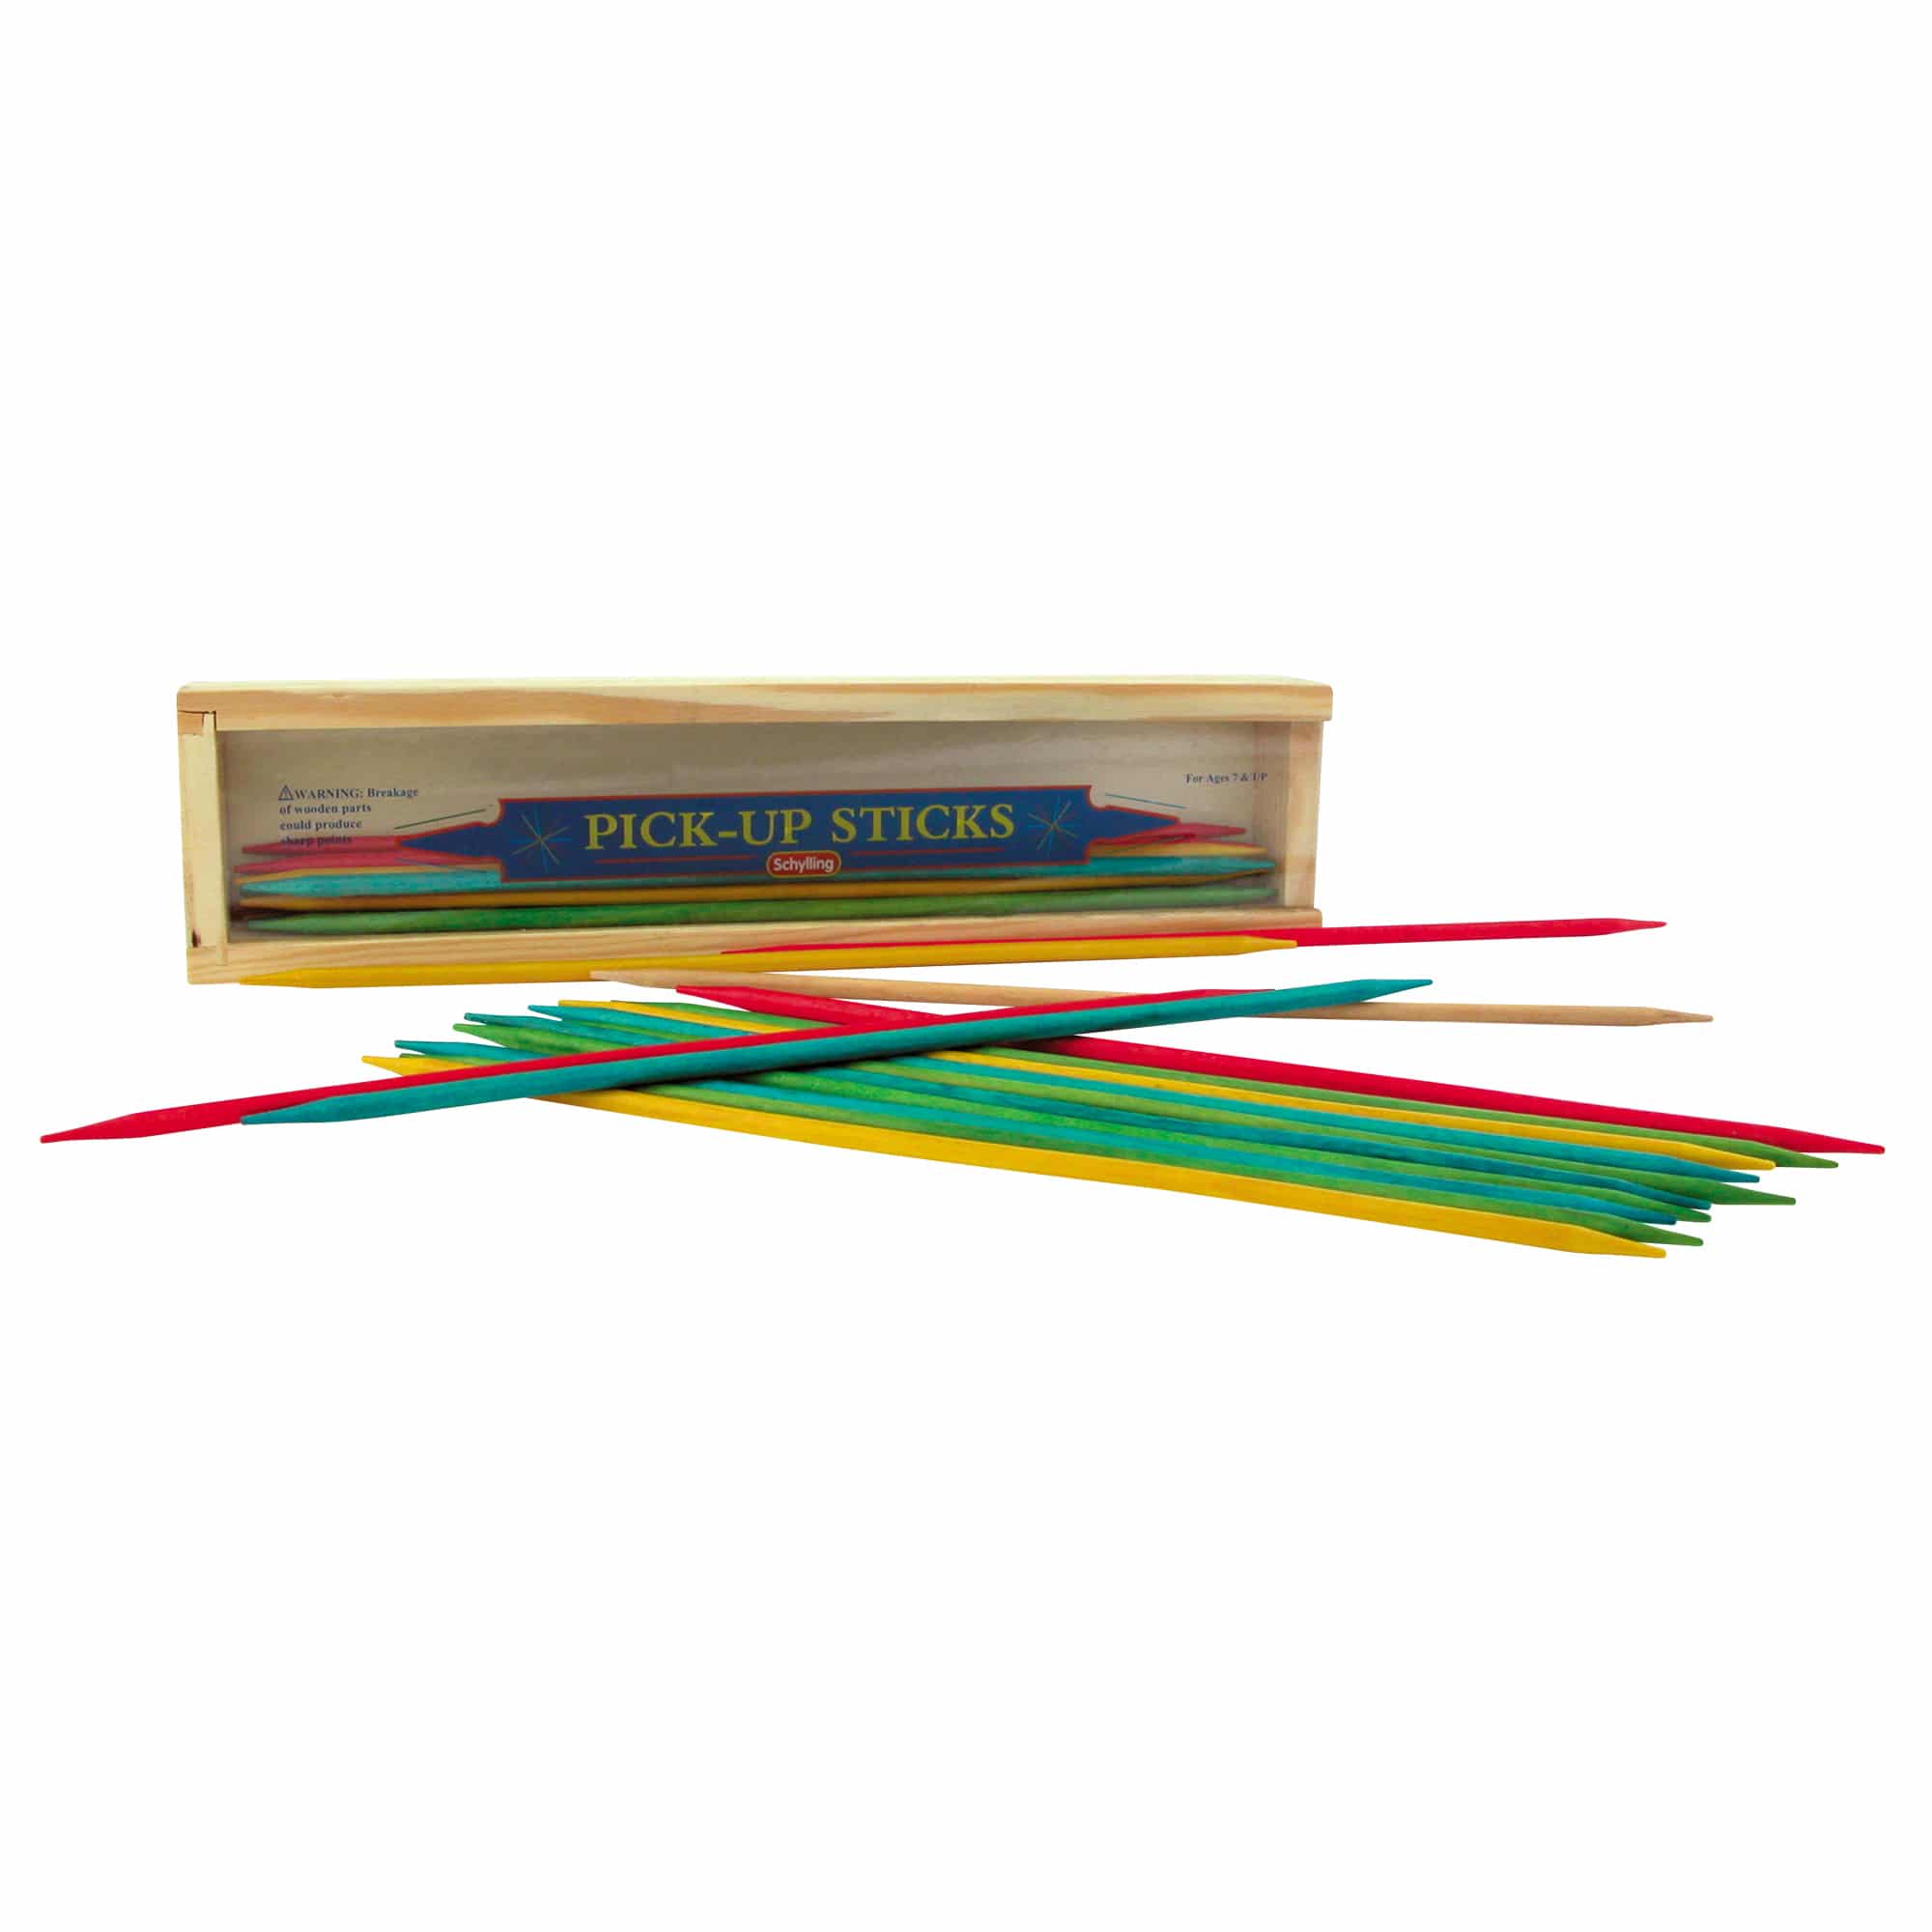 Pick-Up Sticks-Games-Schylling-Yellow Springs Toy Company